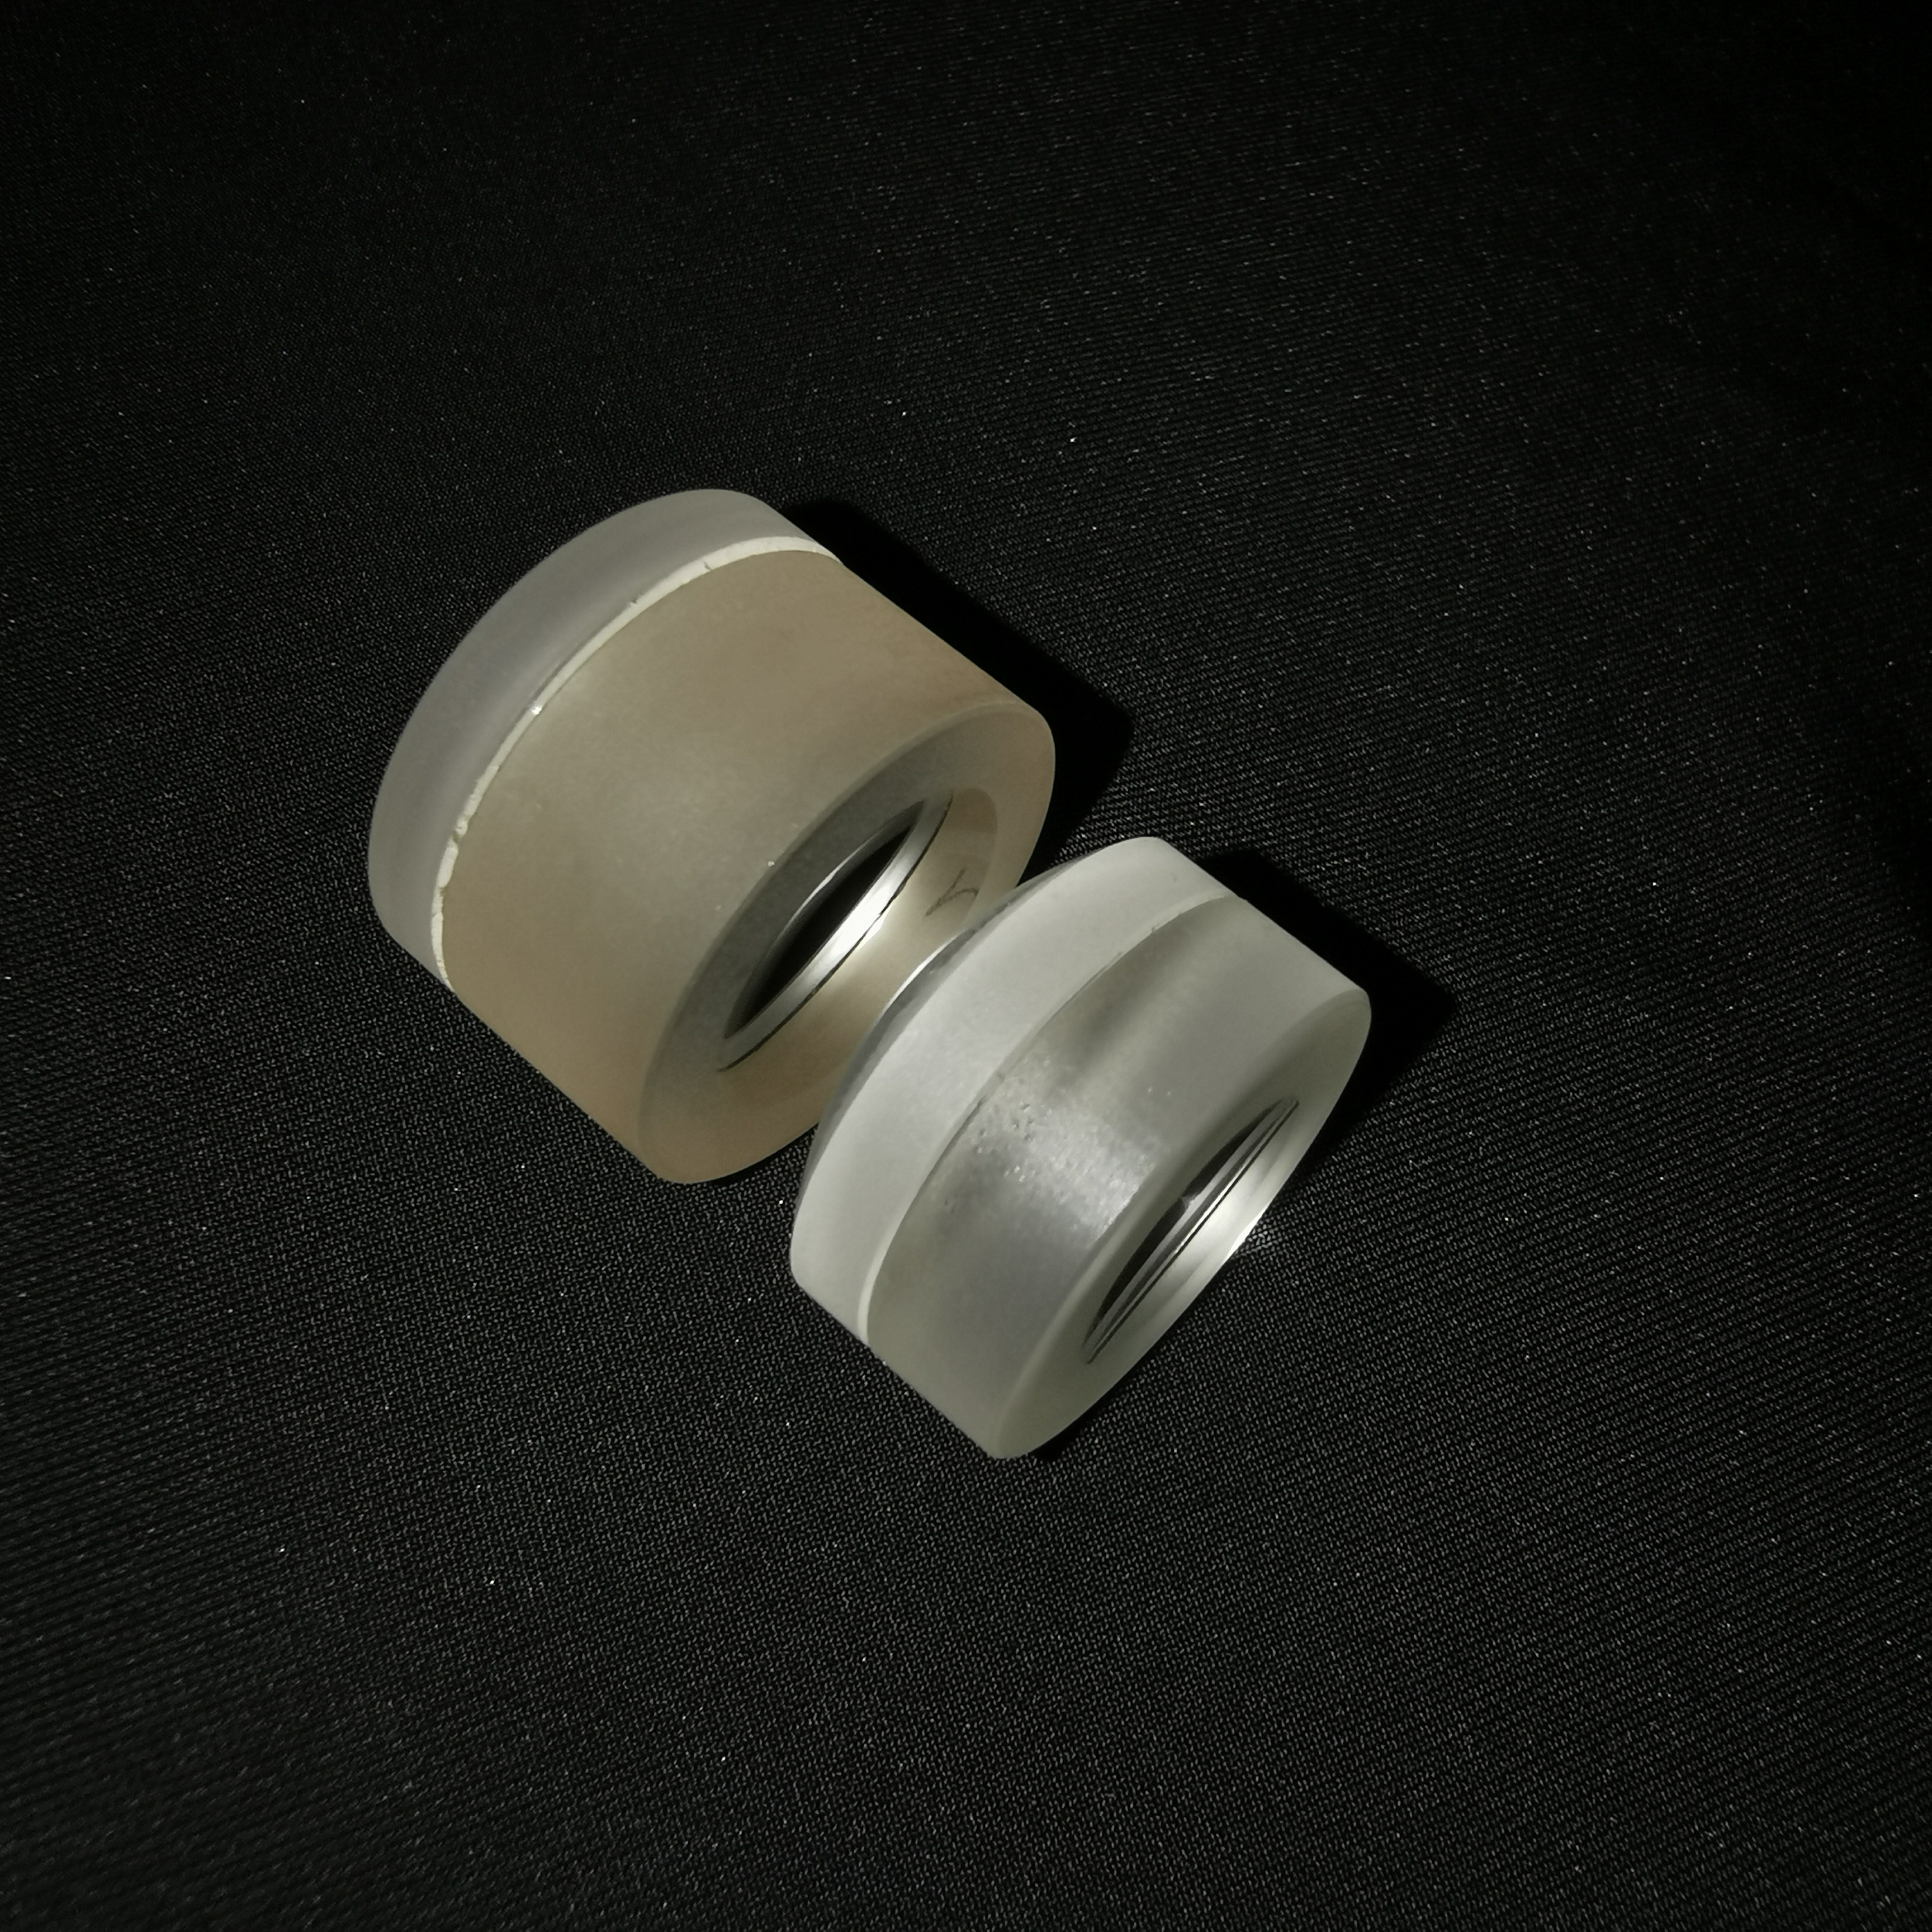 Achromatic cemented doublet lens 